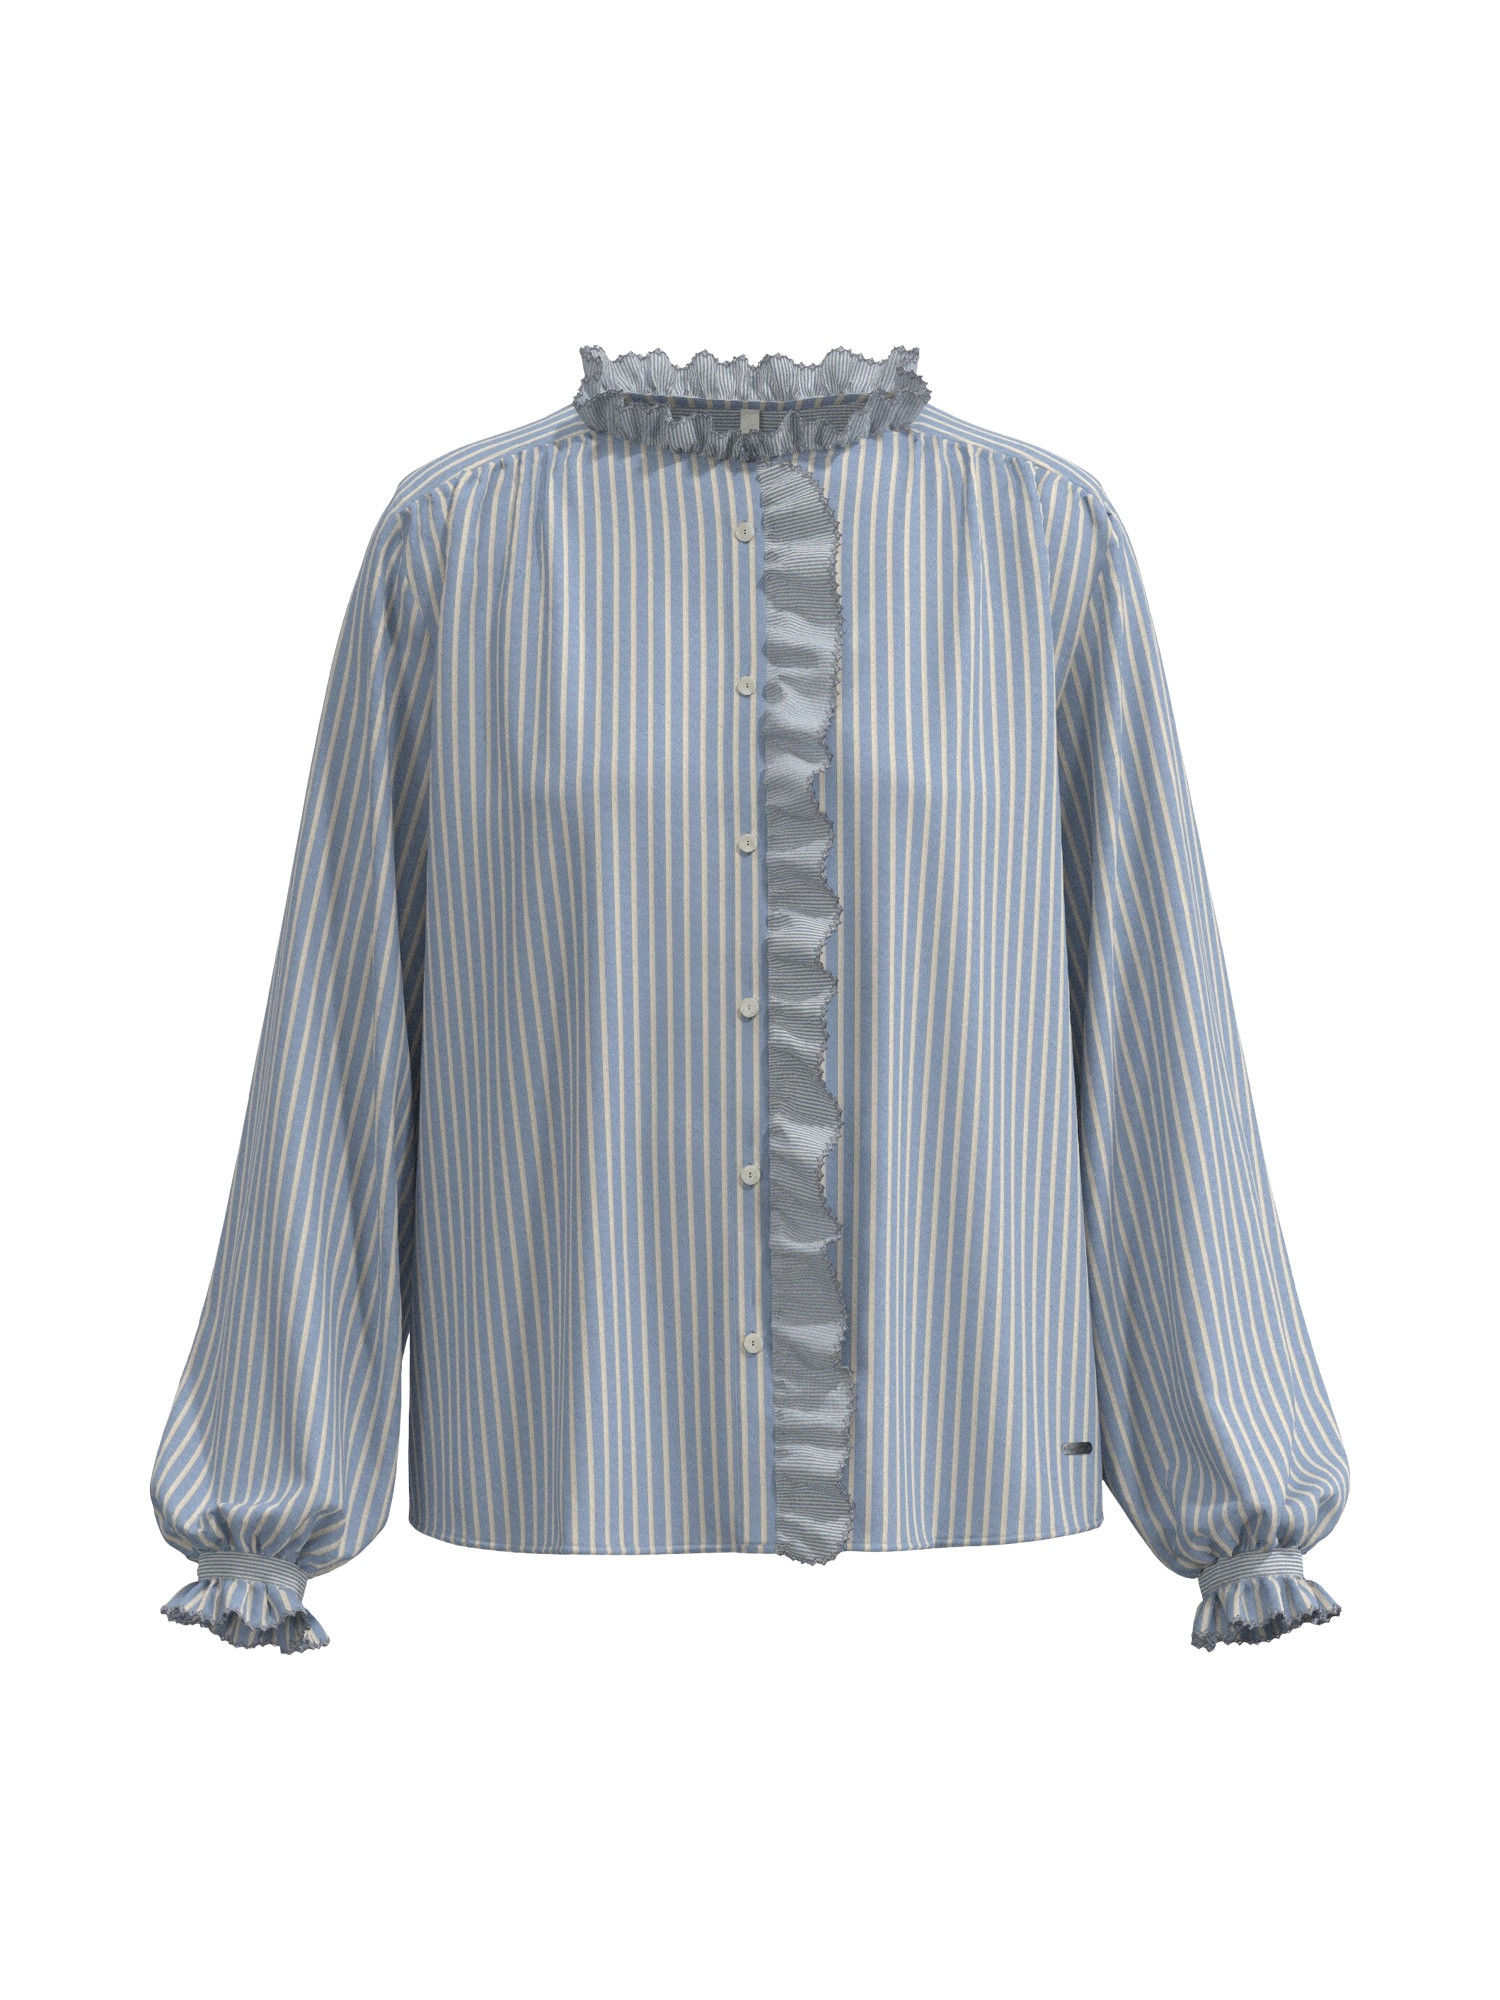 Pepe Jeans - Striped shirt in cotton, Light Blue, large image number 0